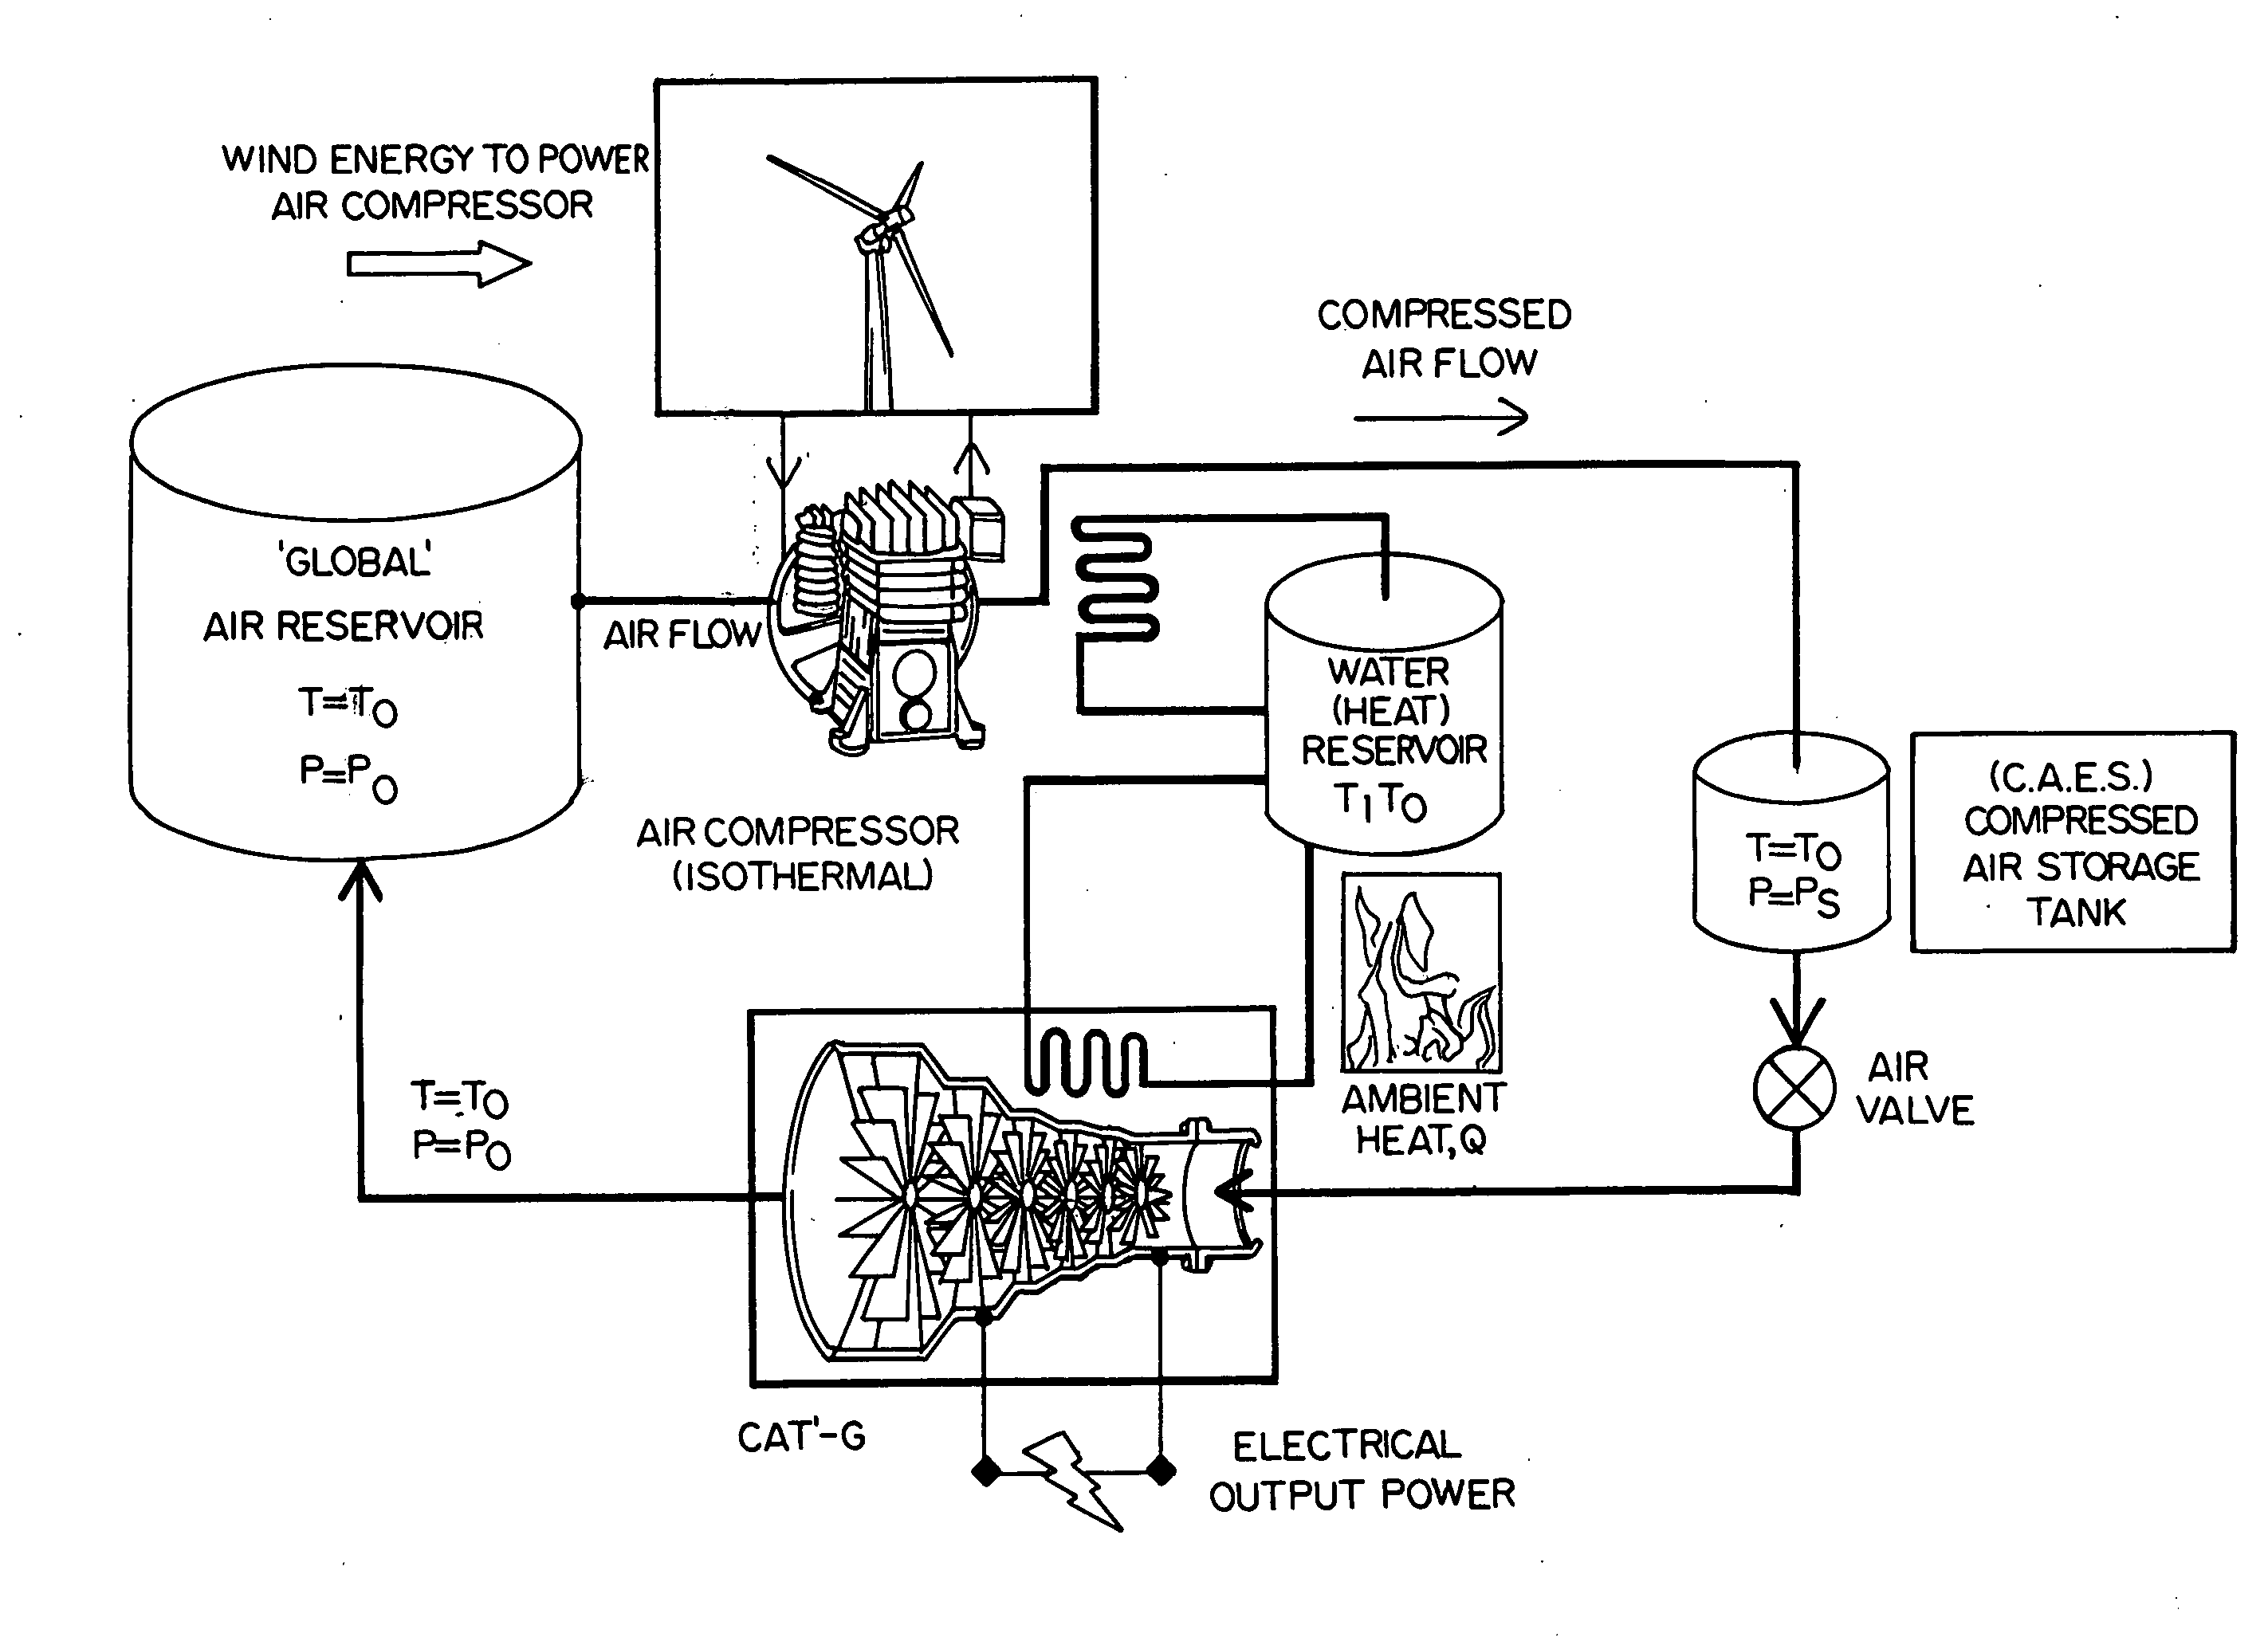 Power generation directly from compressed air for exploiting wind and solar power